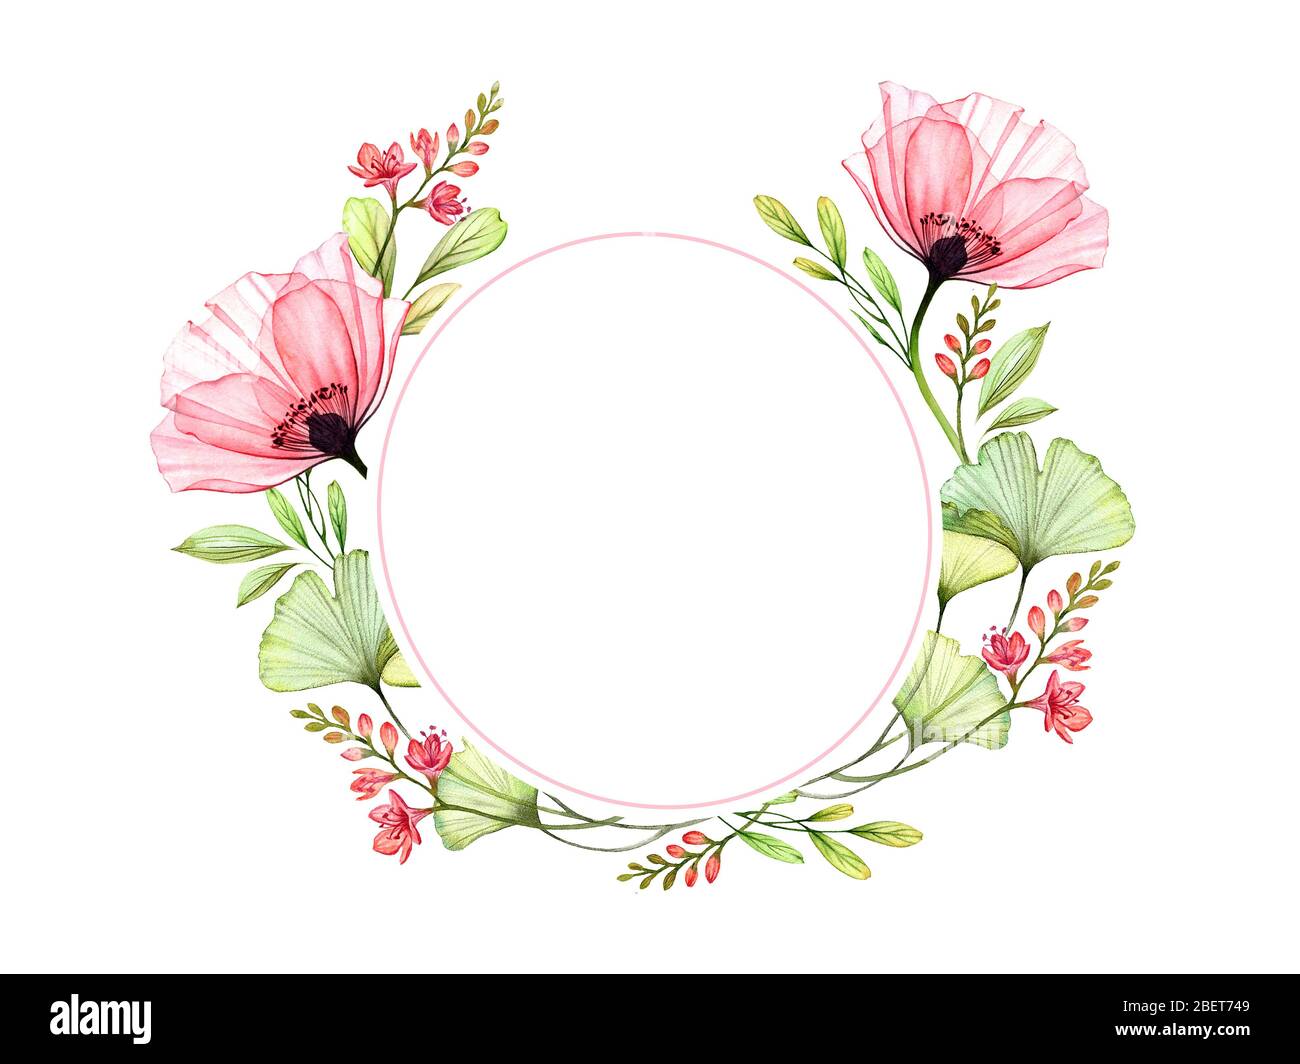 embellishments-png-and-adobe-illustrator-clipart-vector-feathers-floral